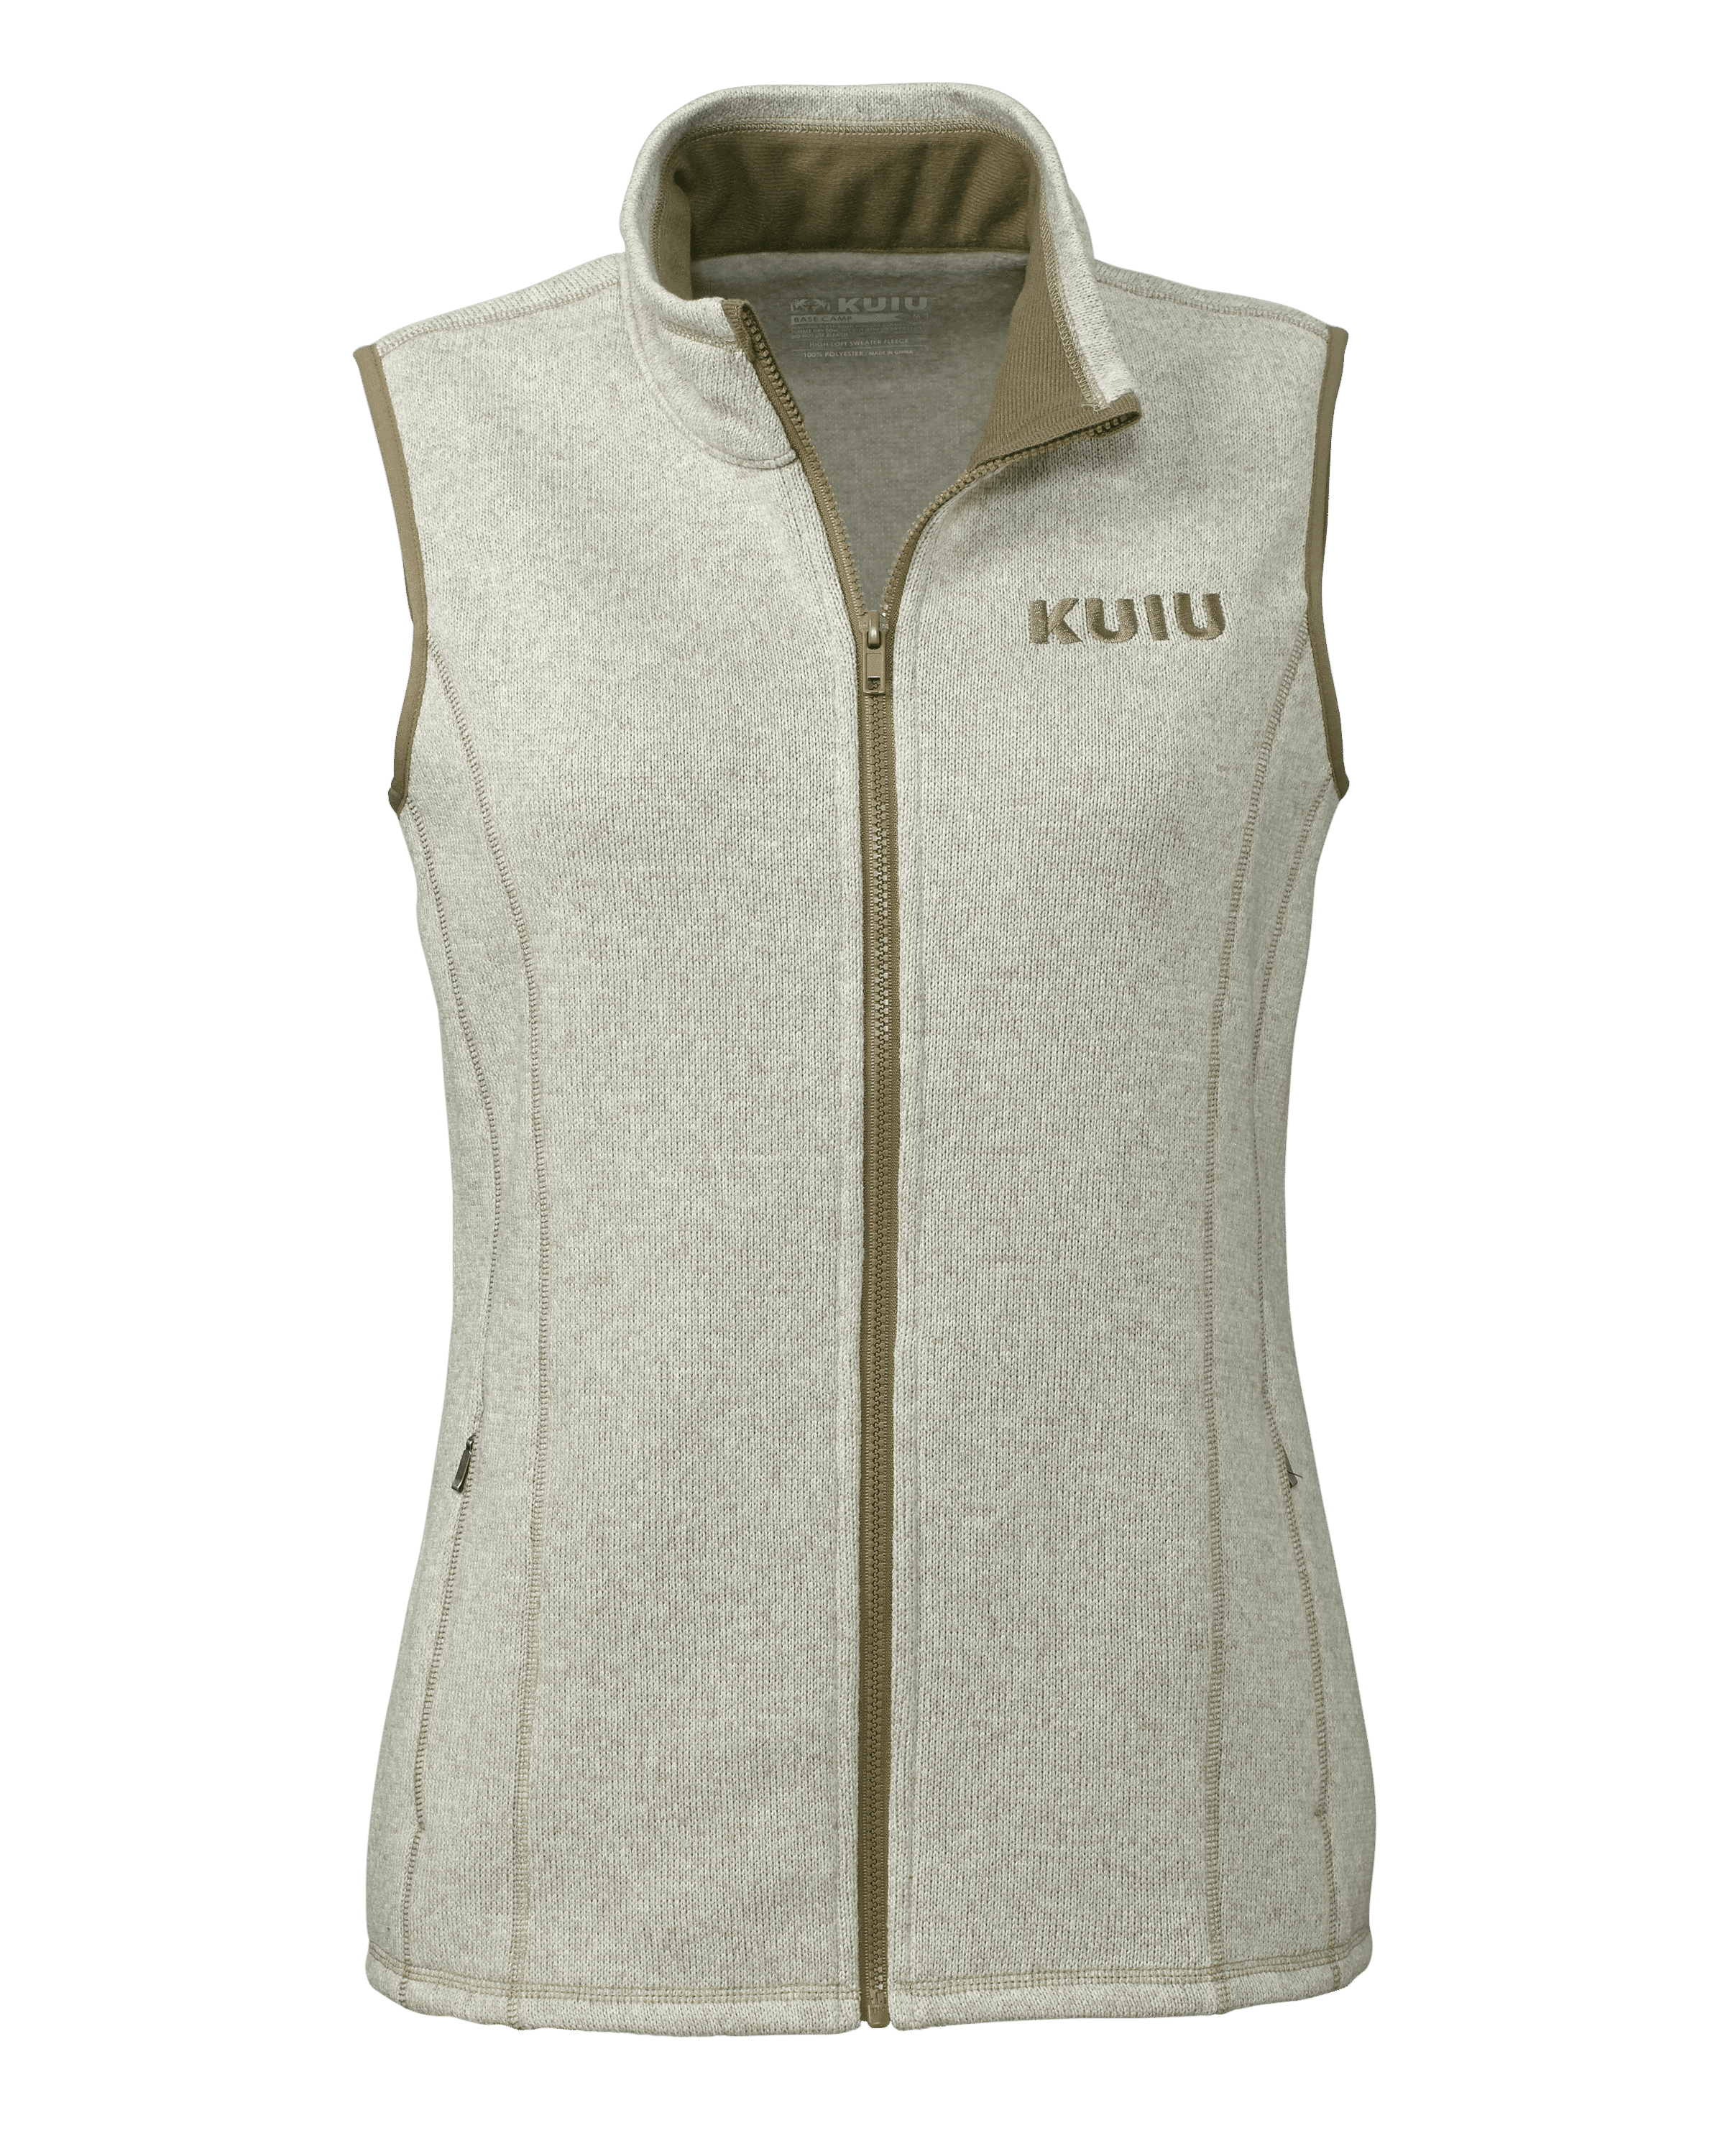 KUIU Outlet Women's Base Camp Sweater Vest in Oatmeal | Small